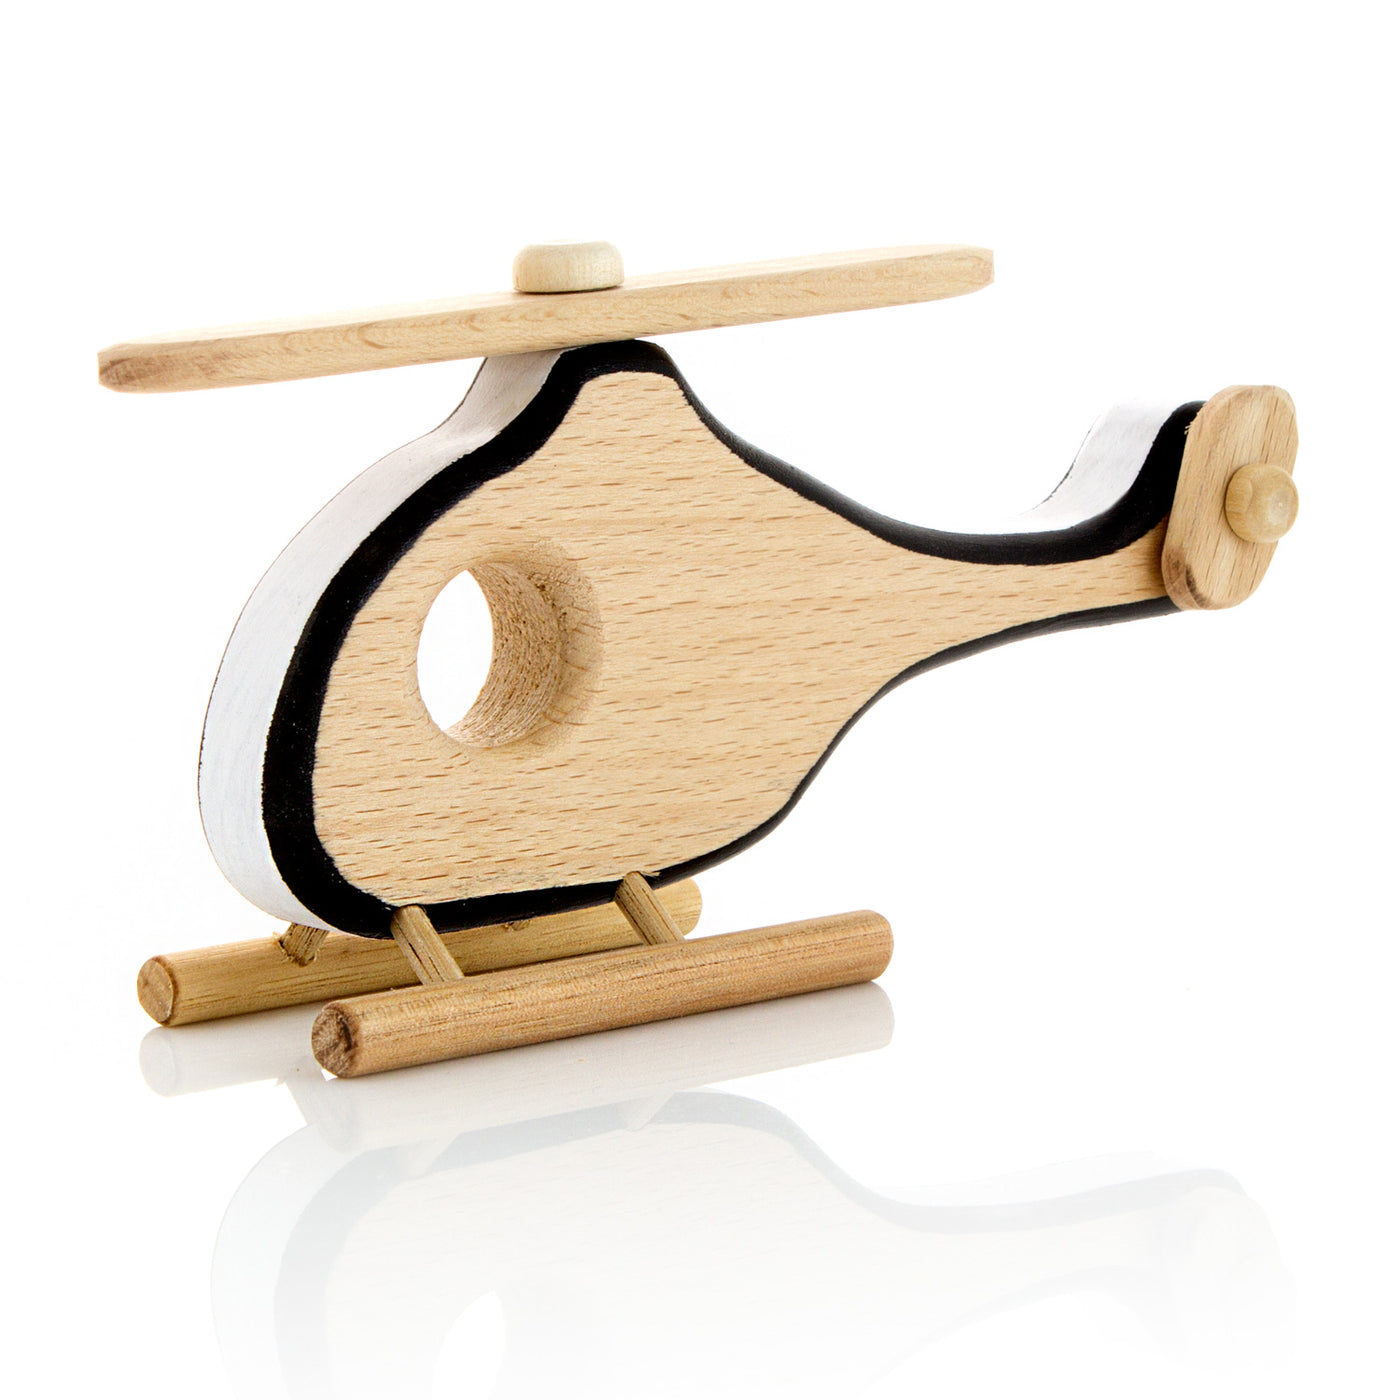 Monochrome Wooden Toy Helicopter – Milton Ashby